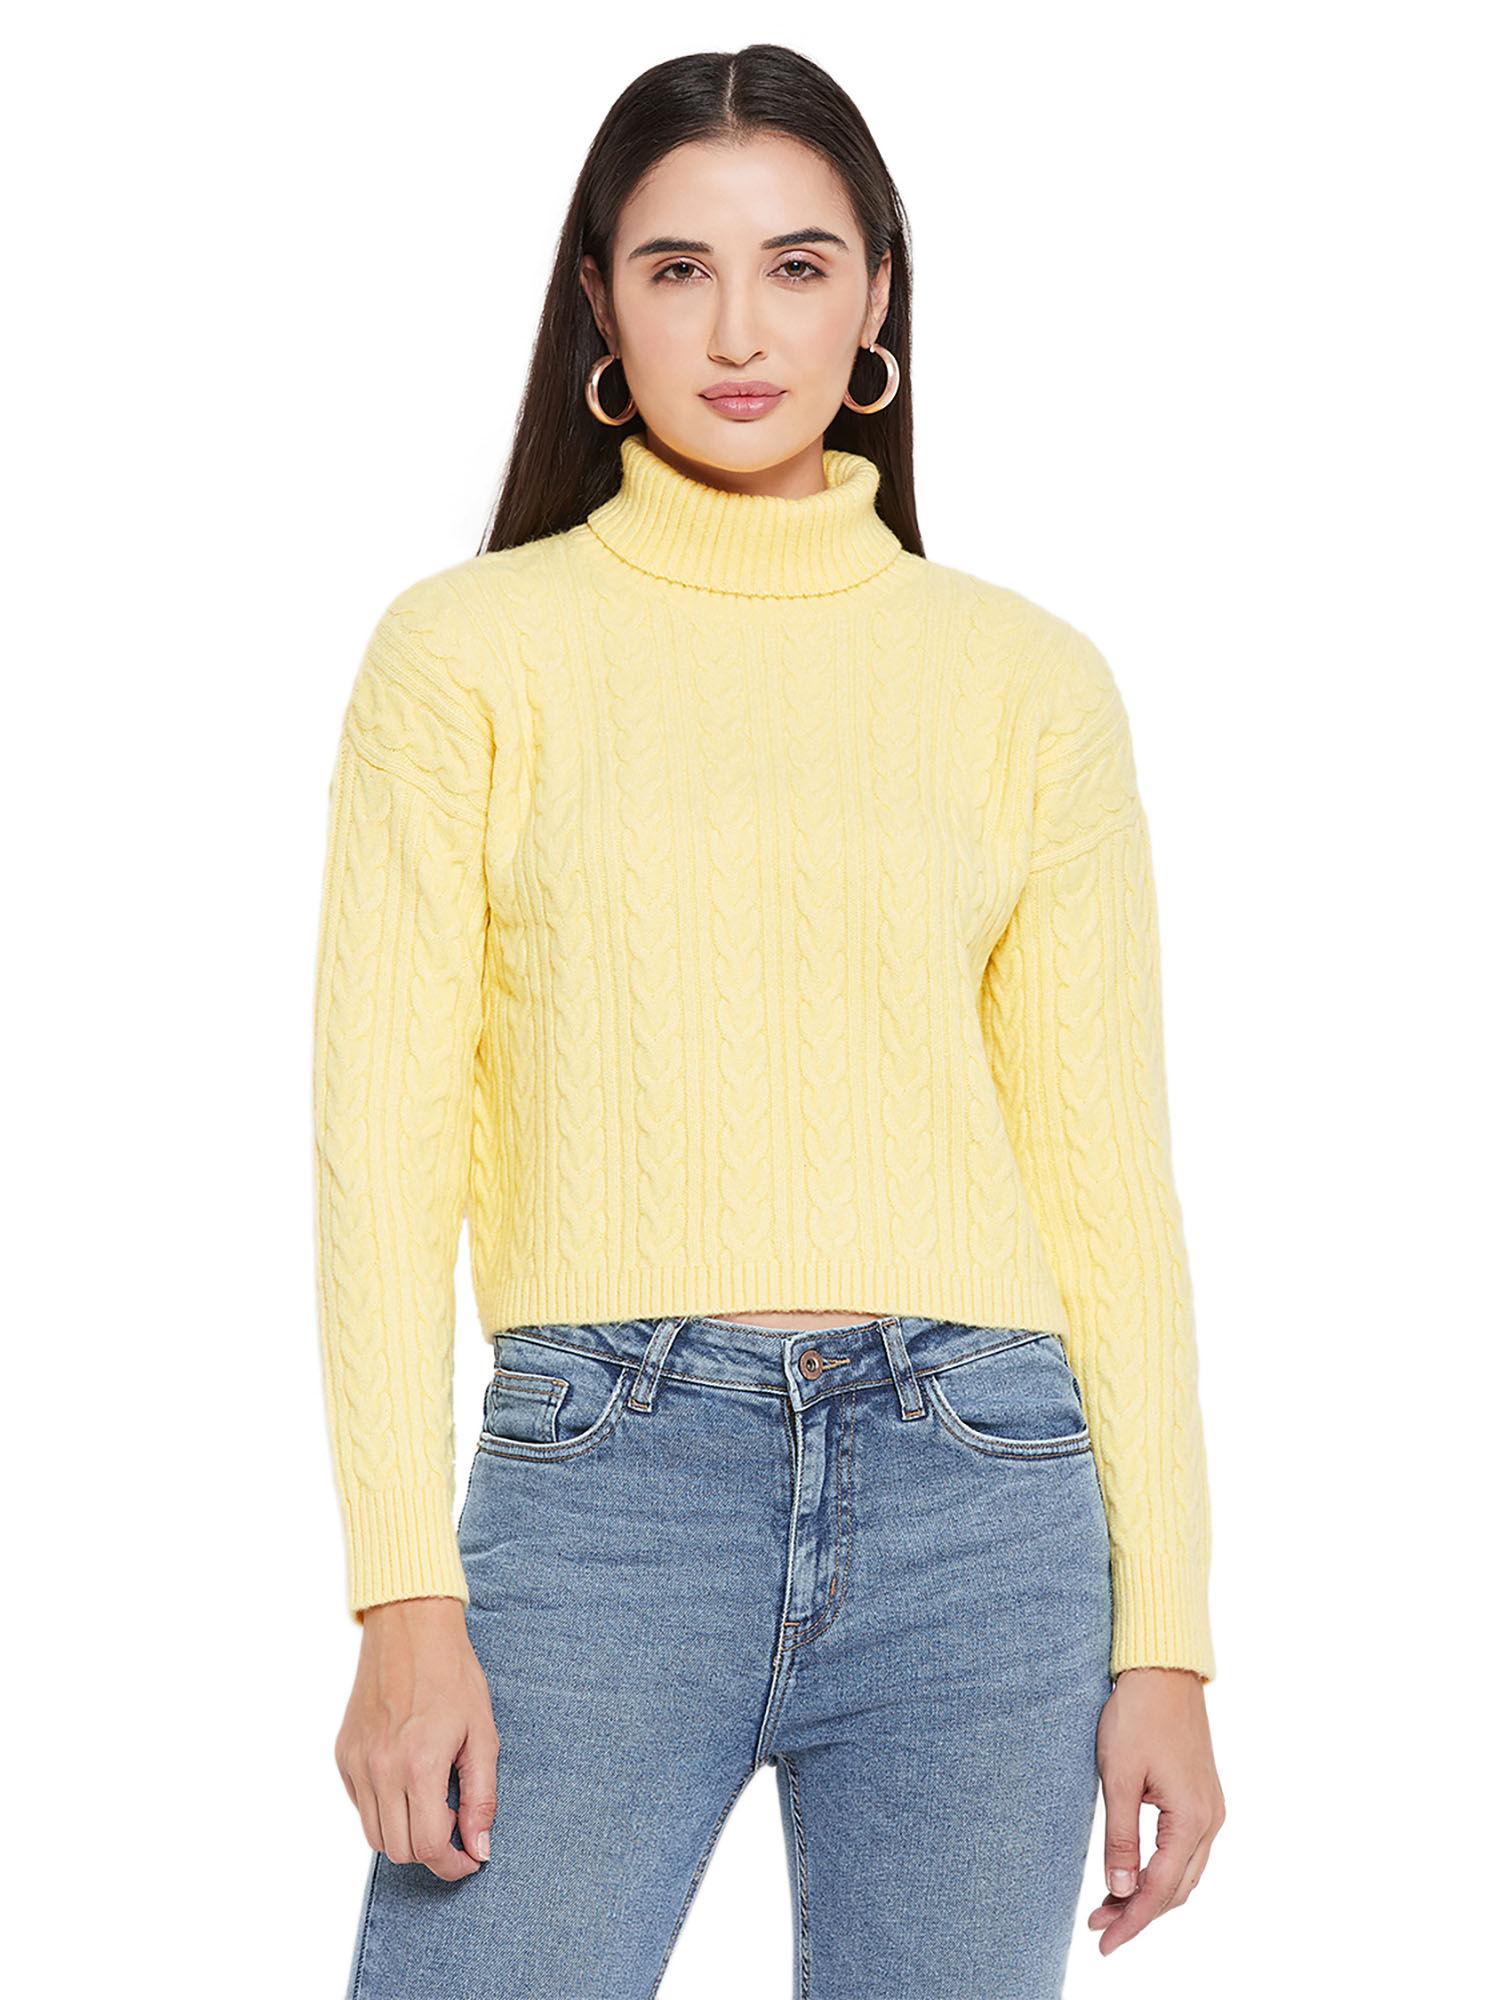 barcelona cable knit lemon yellow turtle neck sweater